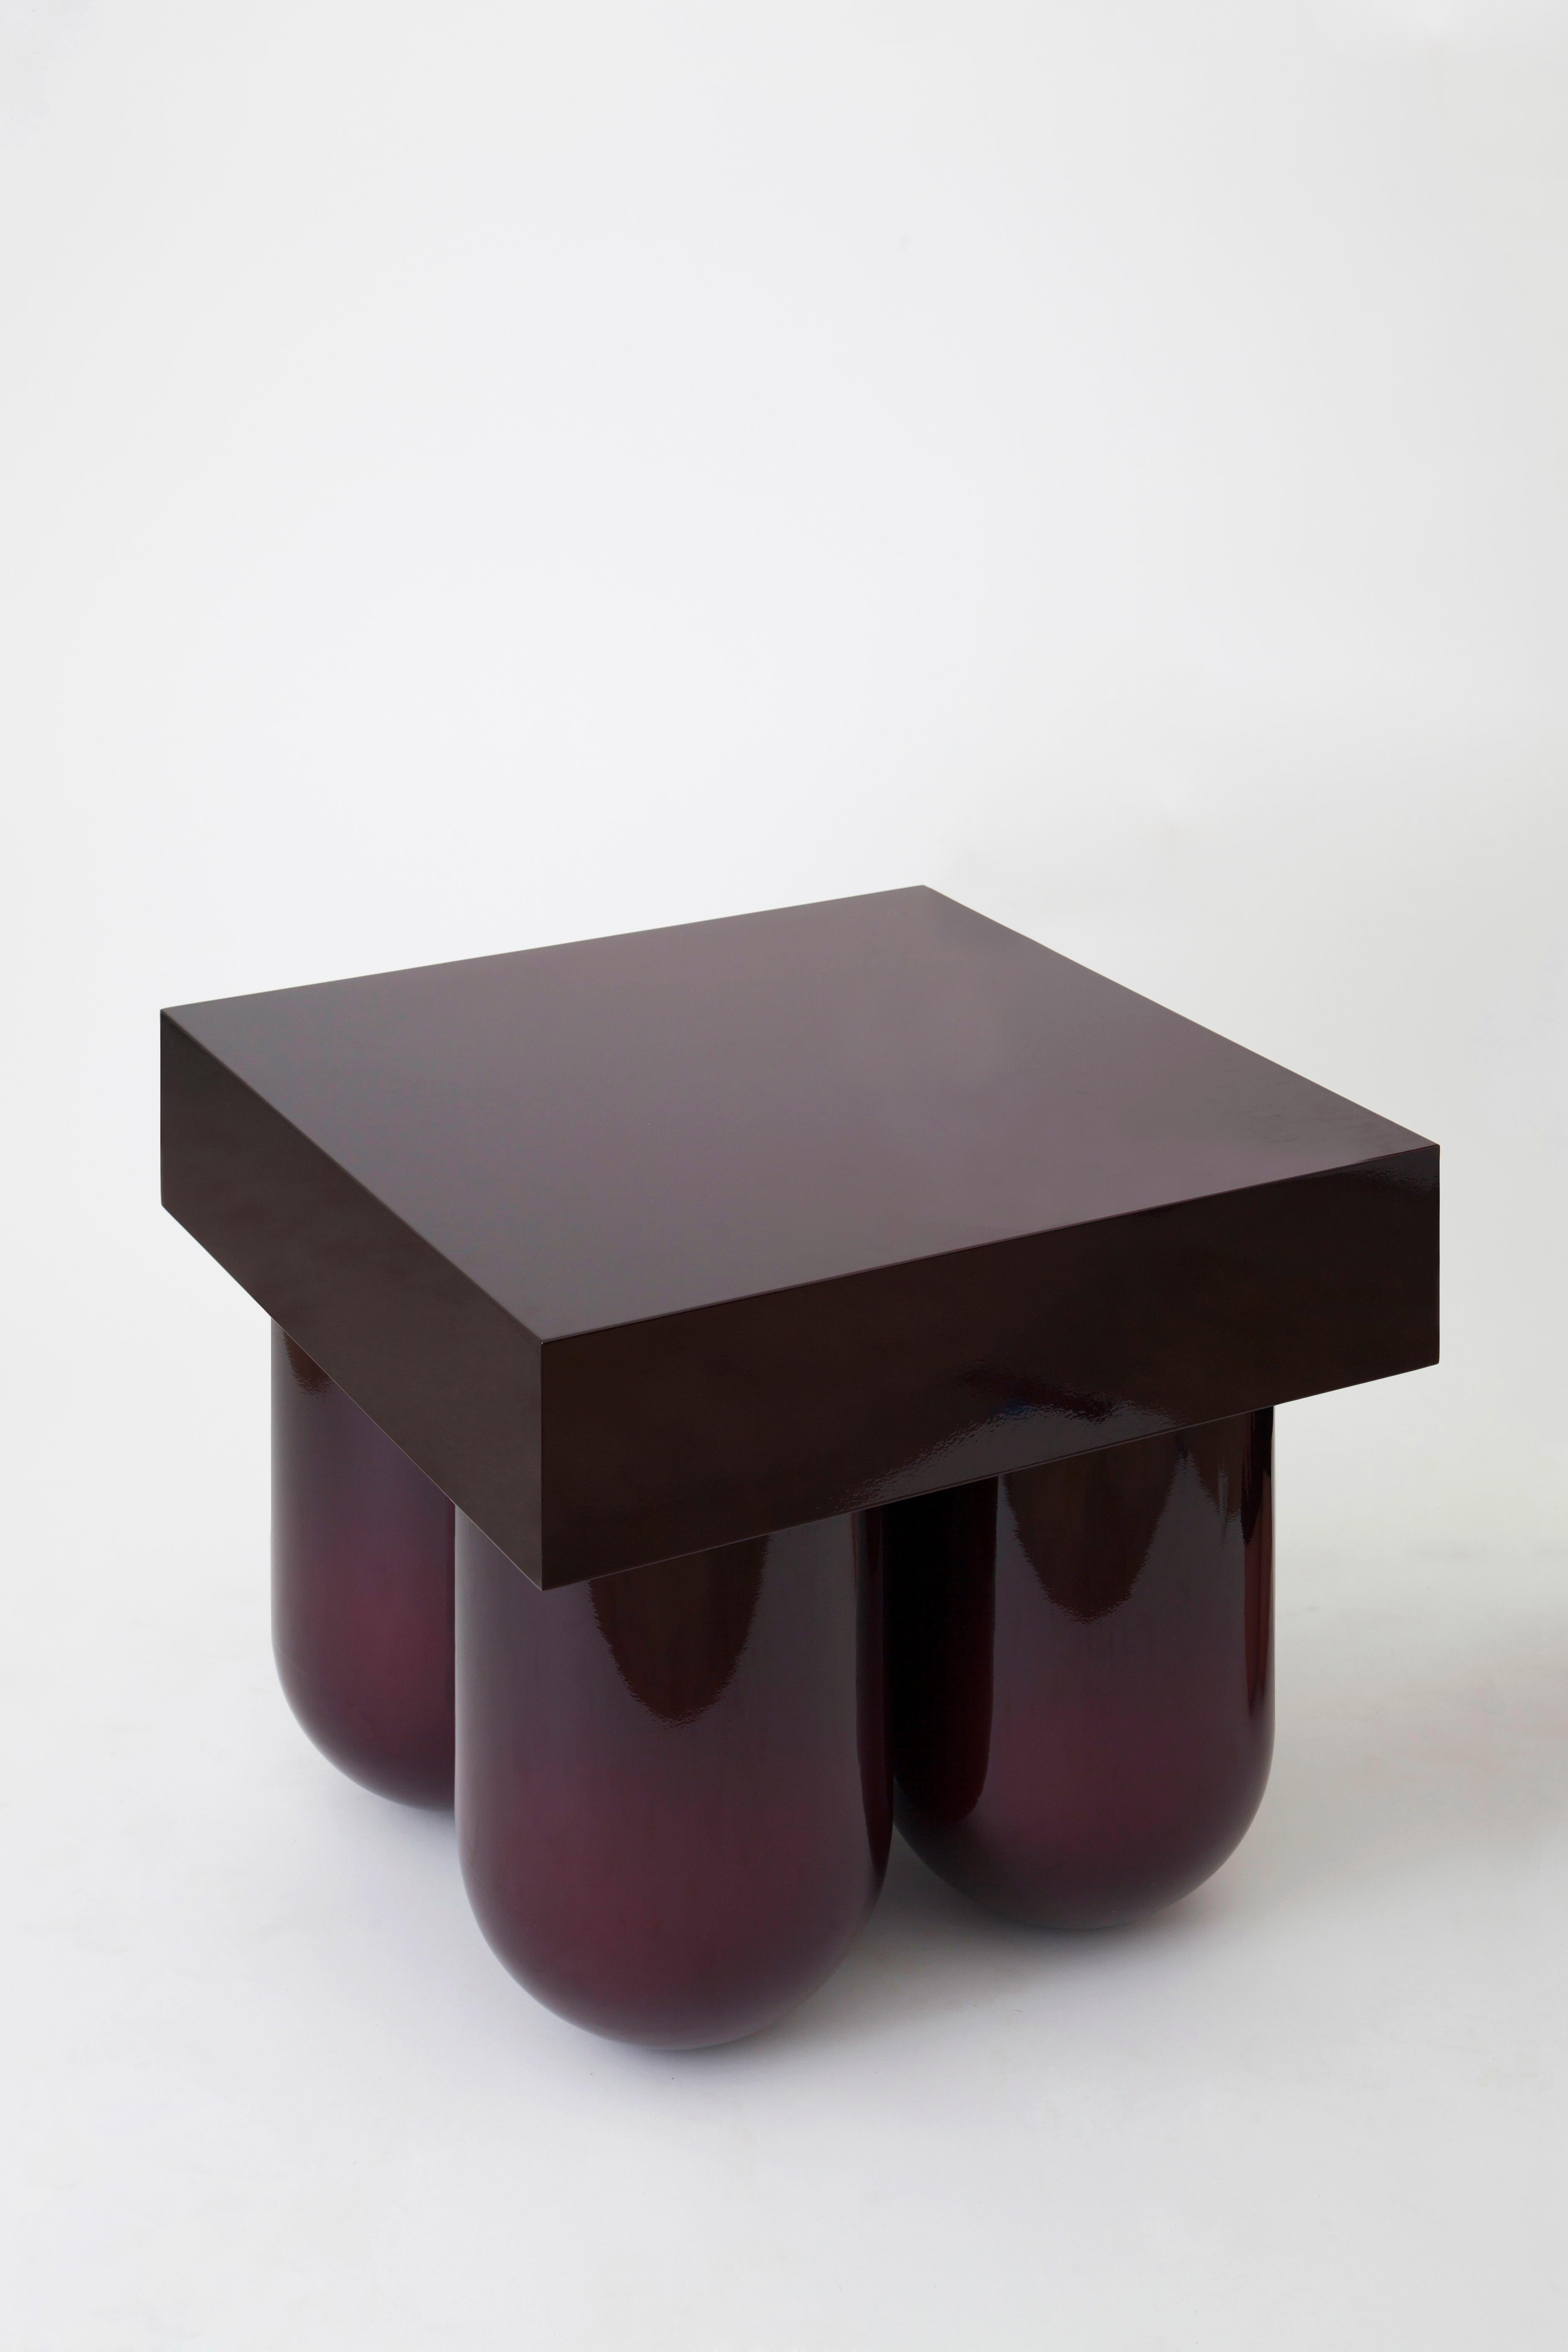 Pair of carved wood set No. 5 tables by Müsing-Sellés
Dimensions: W 60 x D 60 x H 60 cm
Materials: Carved wood, high gloss car-paint metallic lacquer

Color finish options: maroon/red gradient
Indigo/blue gradient
Custom color (additional cost